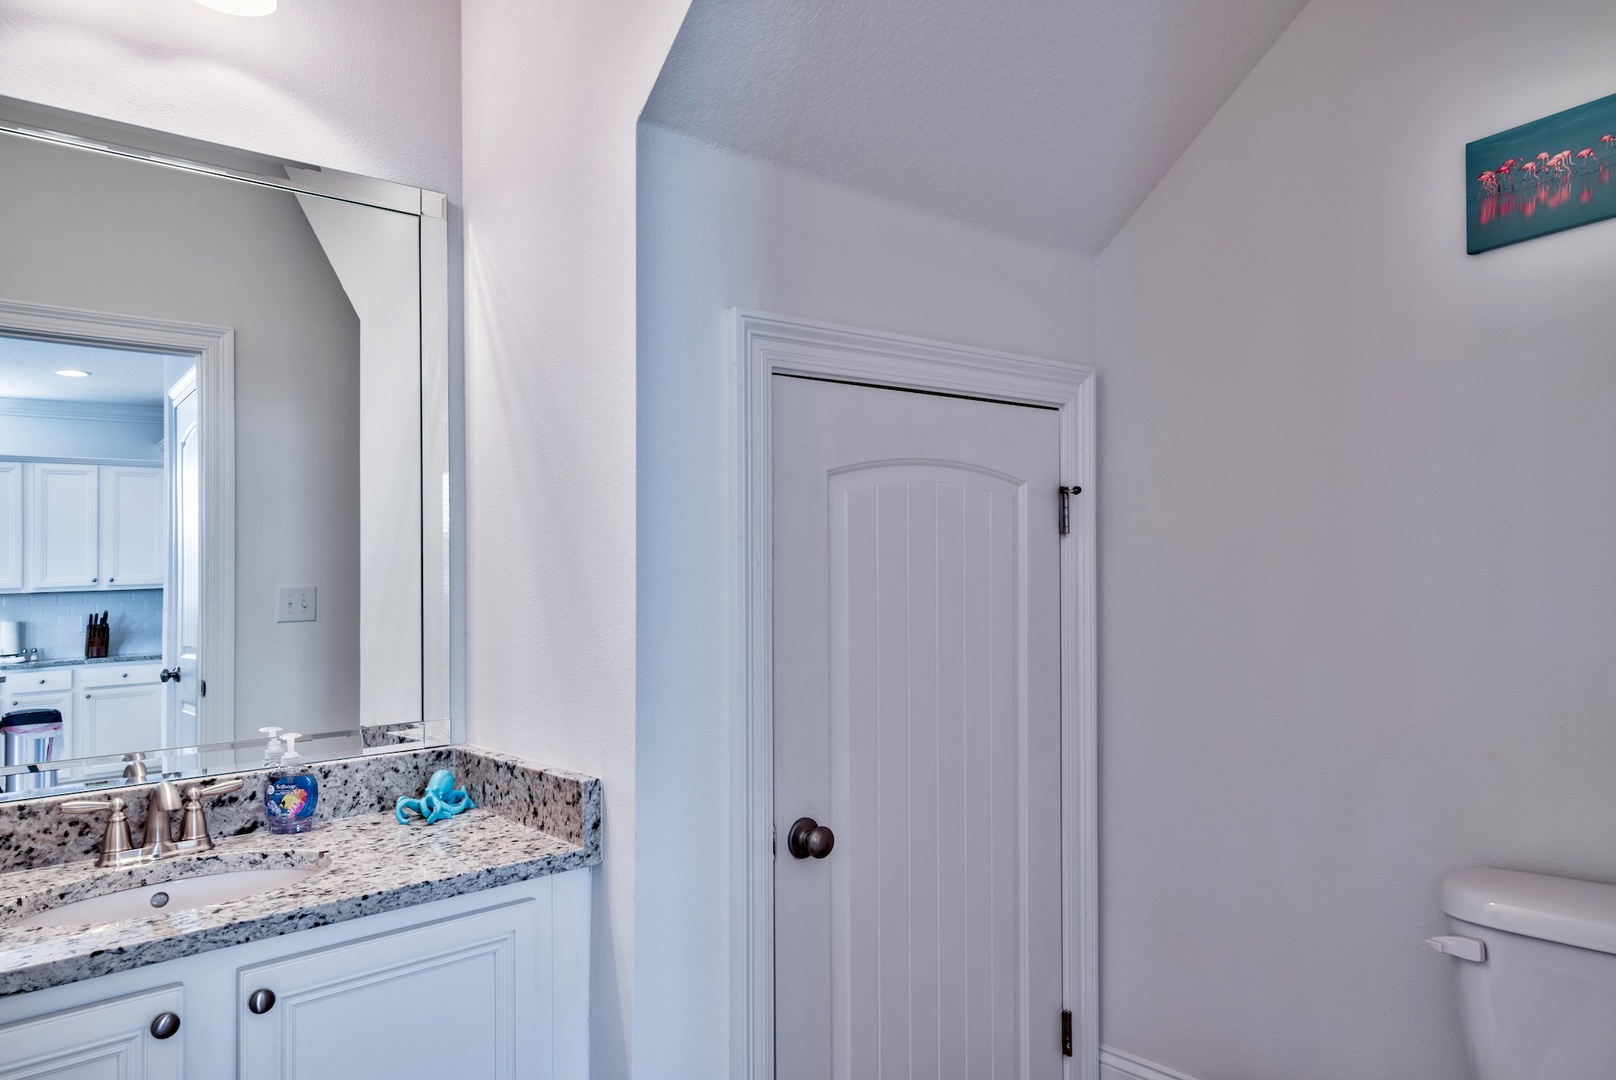 A half-bath is conveniently located on the ground floor!